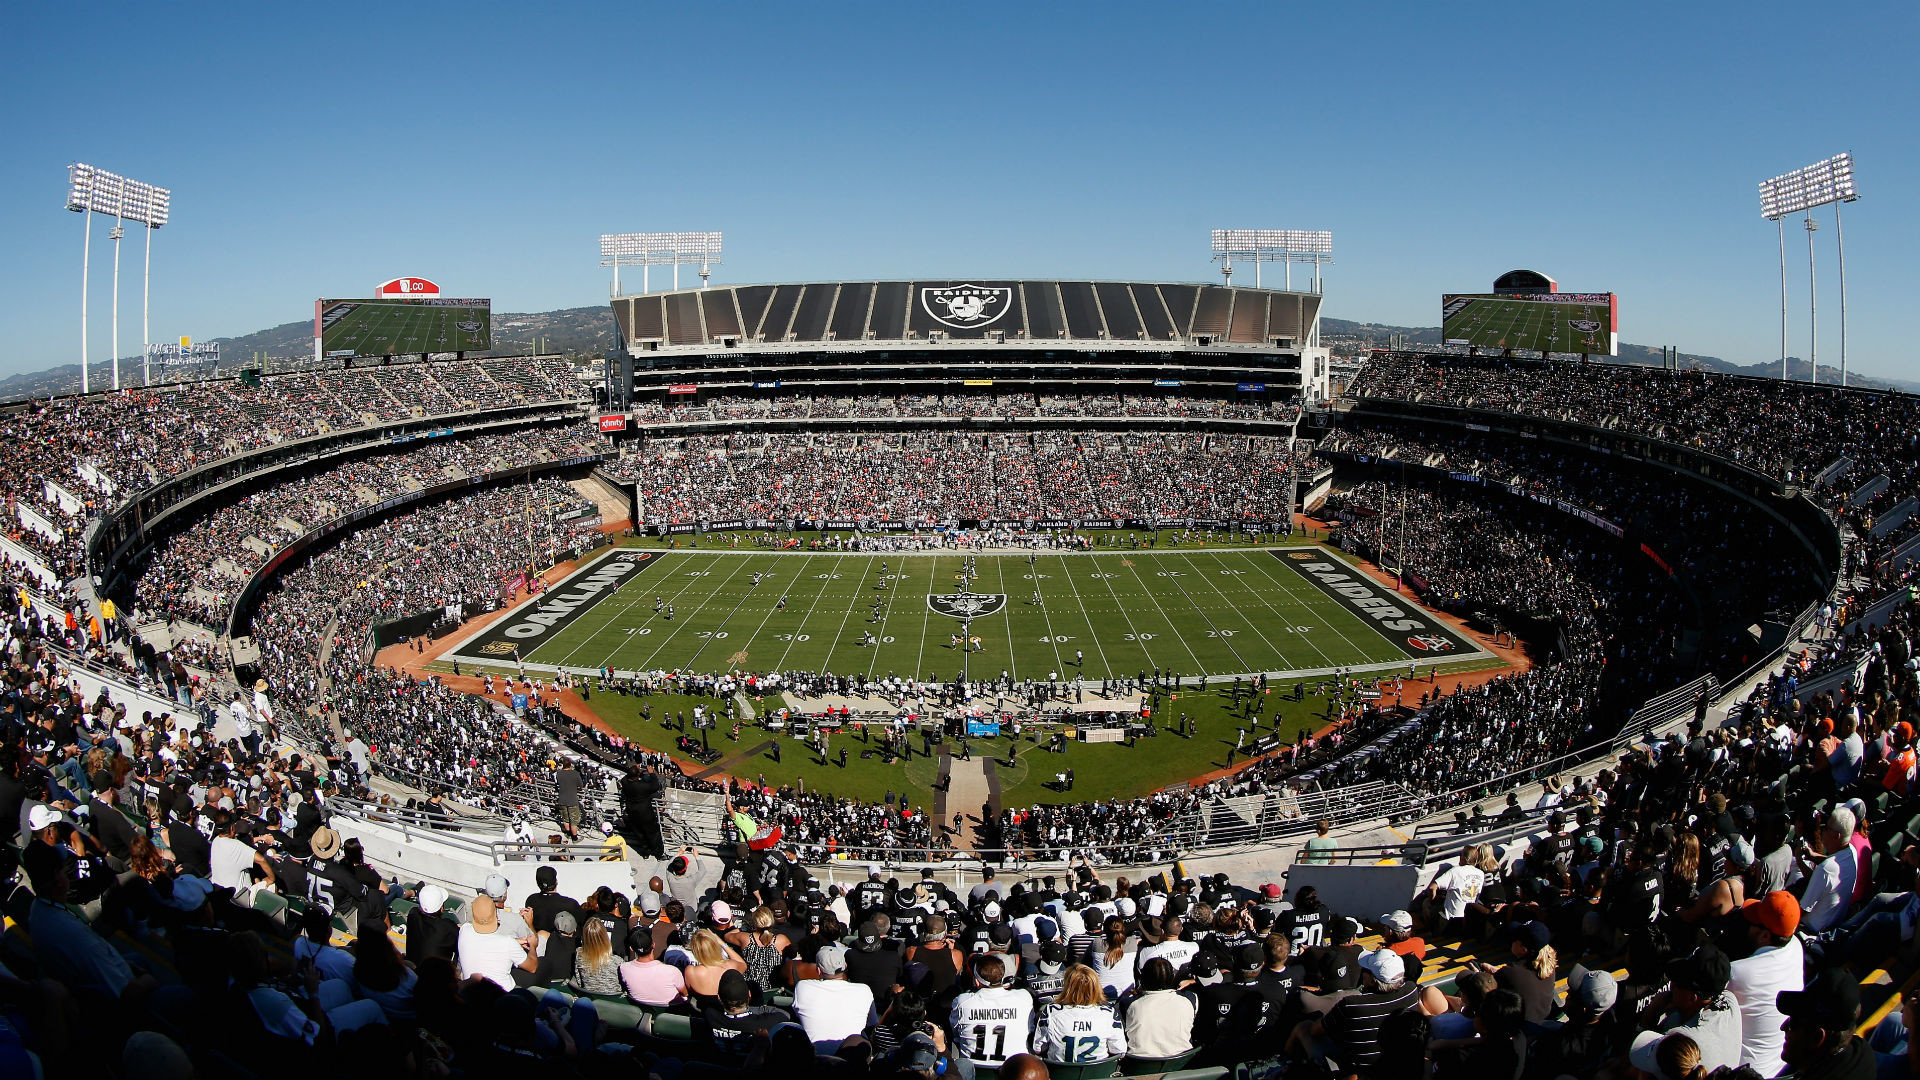 1920x1080 Raiders might stay in Oakland for 2019 after all, report says